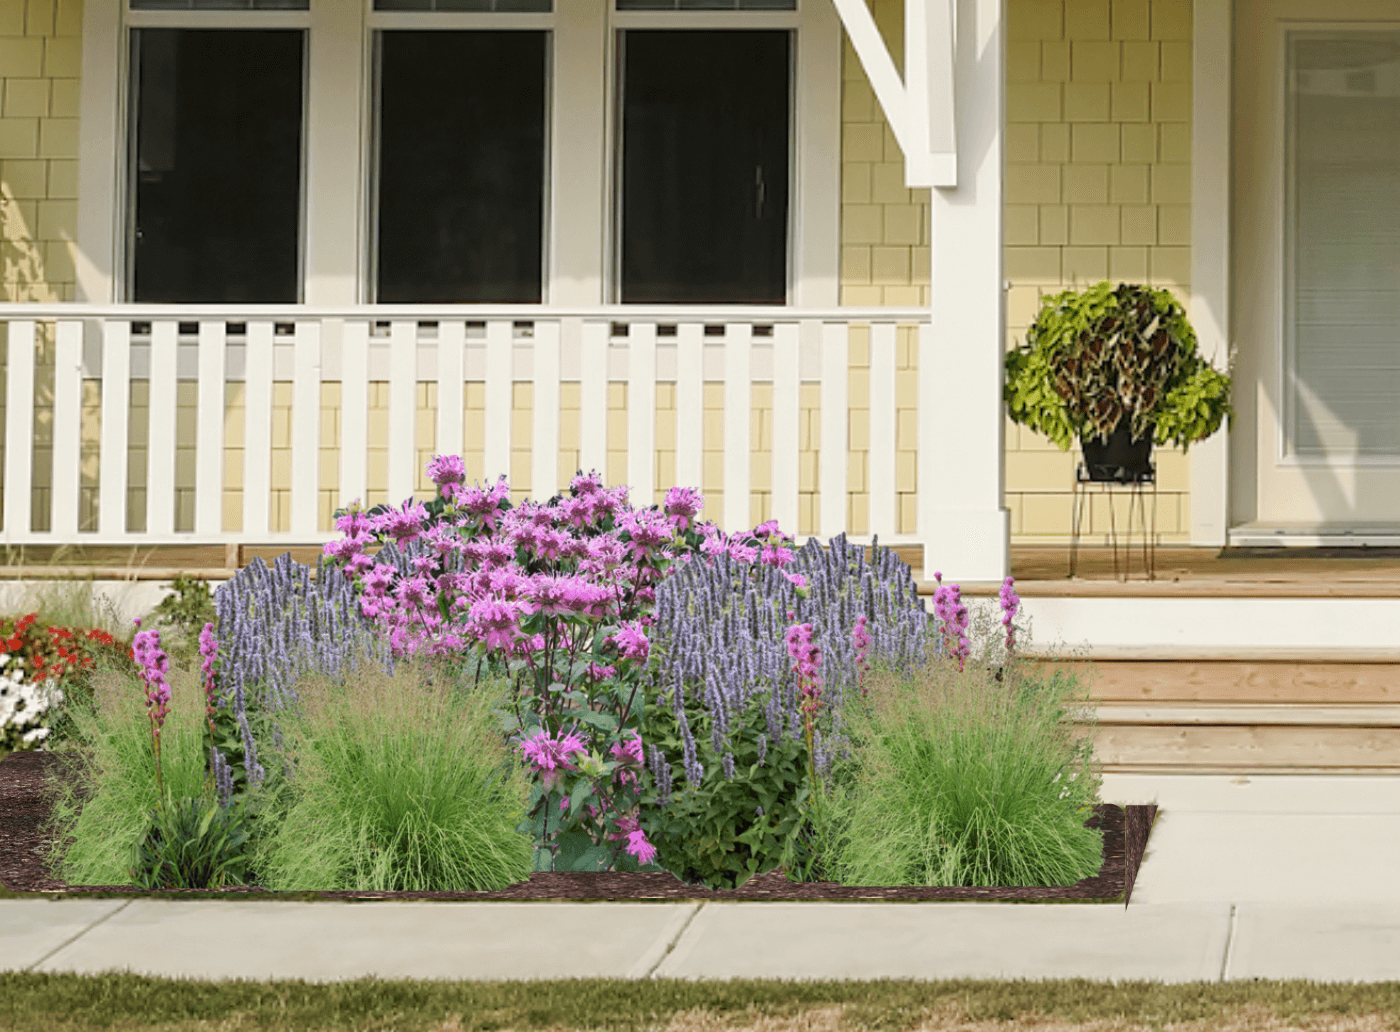 Pink and lavender native plant garden in front of yellow house